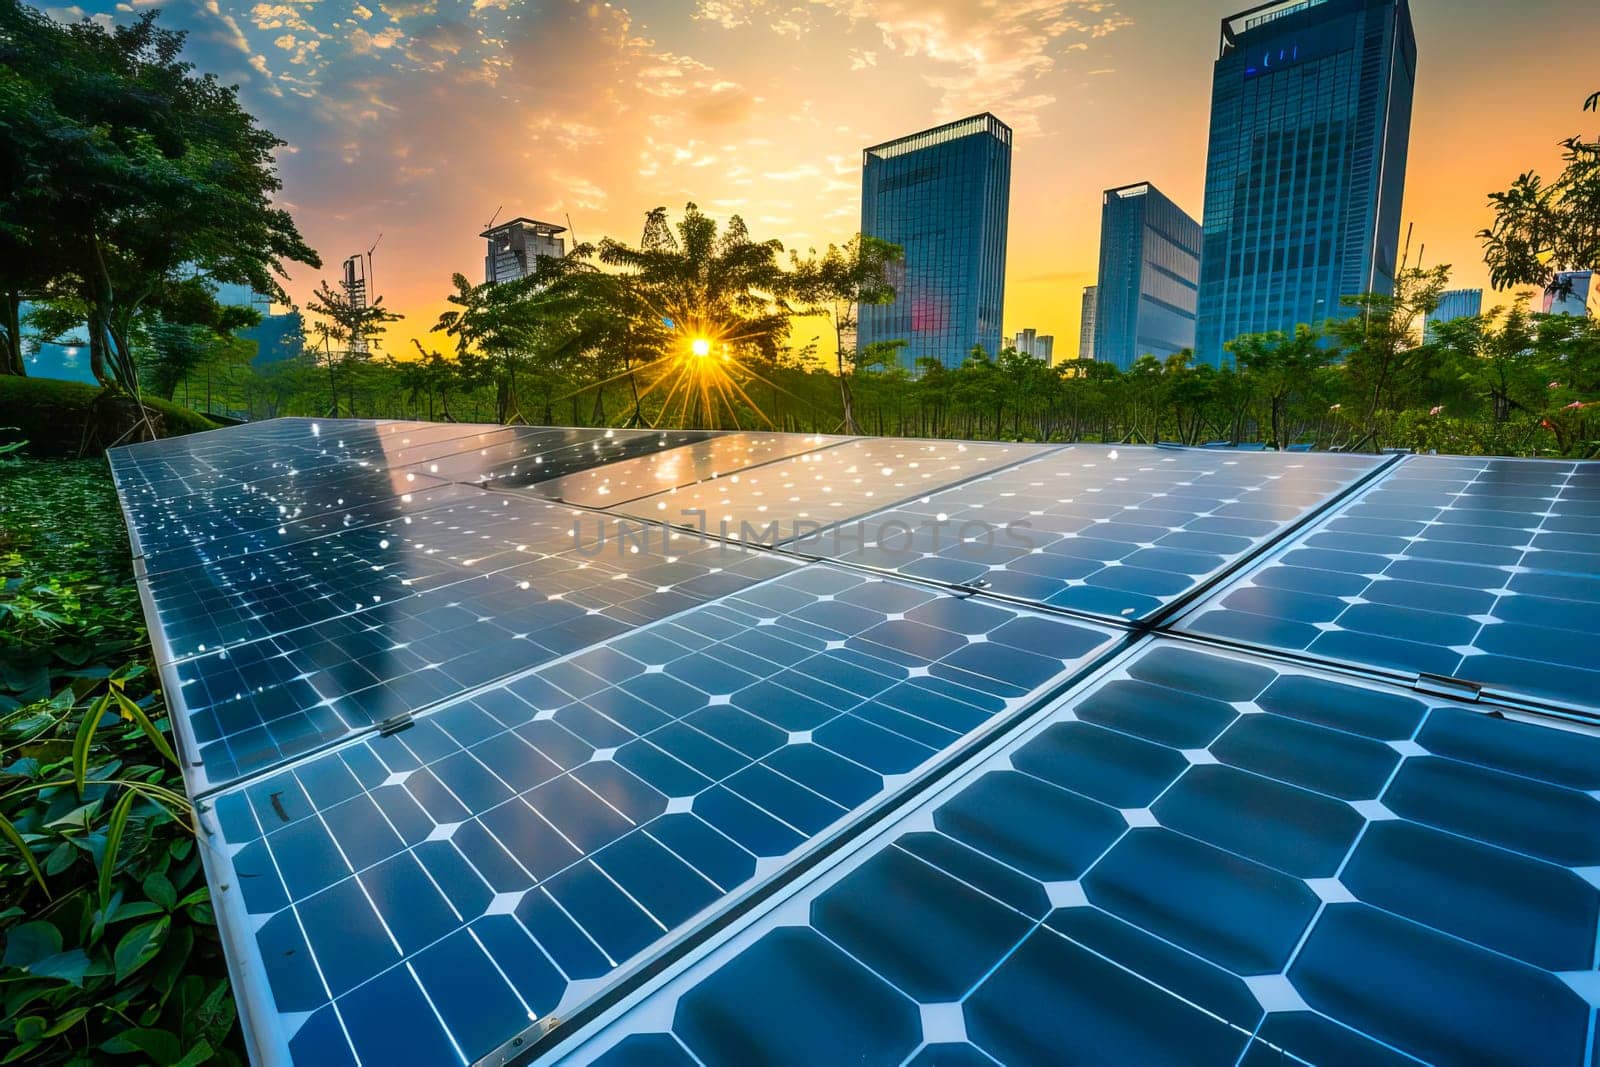 A solar panel capturing sunlight as the sun sets in the background near a modern city with skyscrapers.